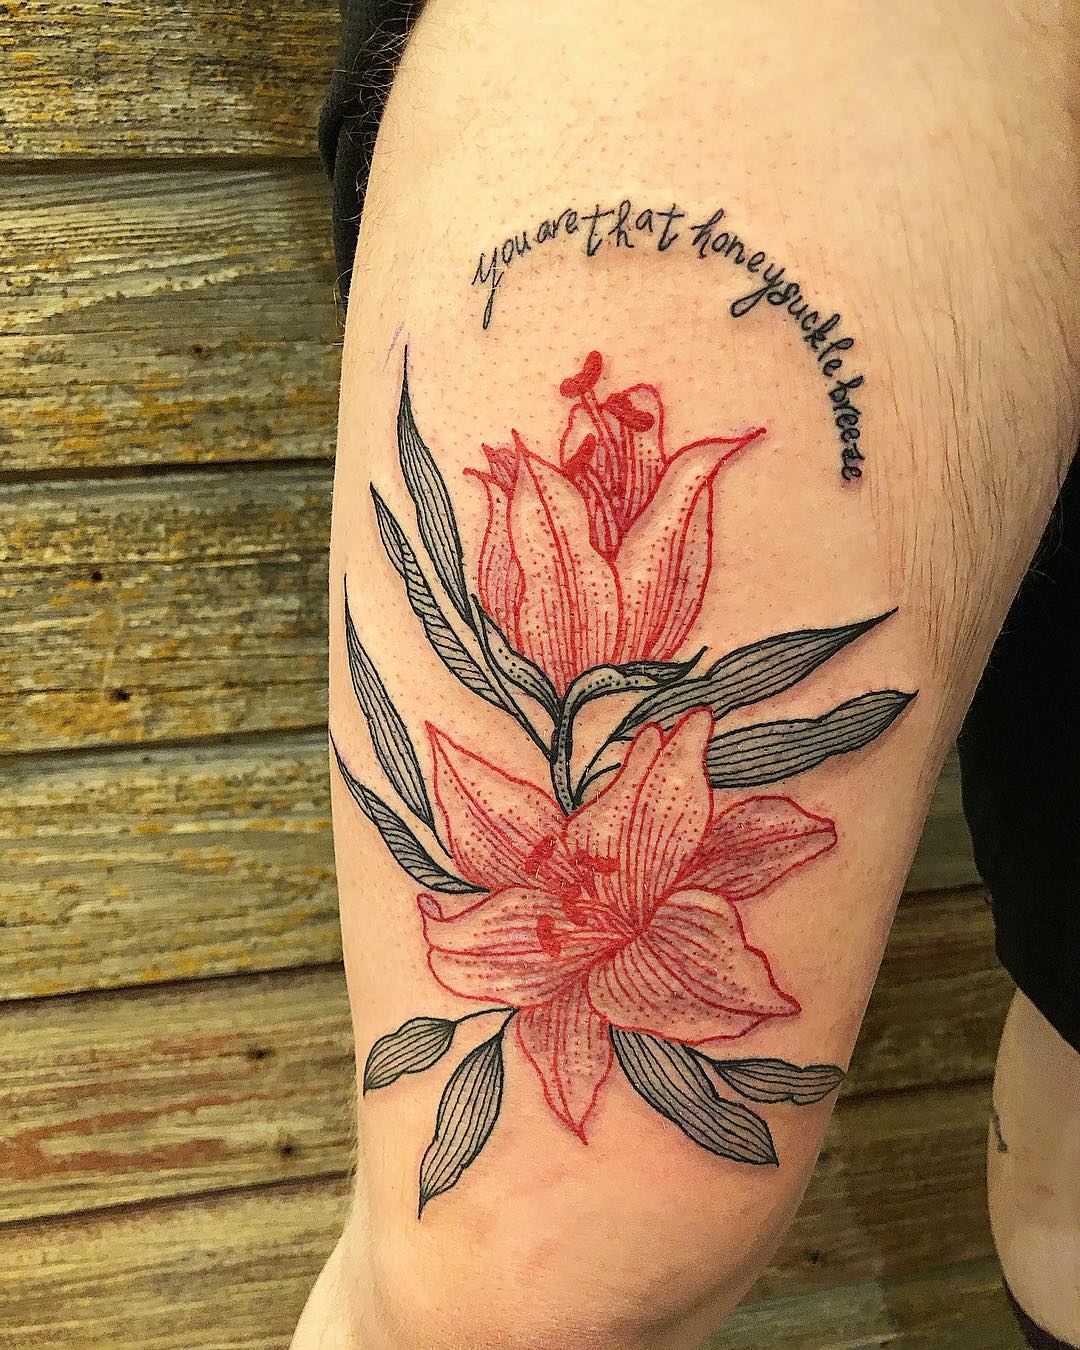 Let's combine red and black colors in a lily tattoo to show everyone that you have a good taste. When you mix them in one tattoo, it becomes a symbol of courage and strength. In order to stand out from the crowd easily, let's cover your upper leg with a red lily and black leaves.